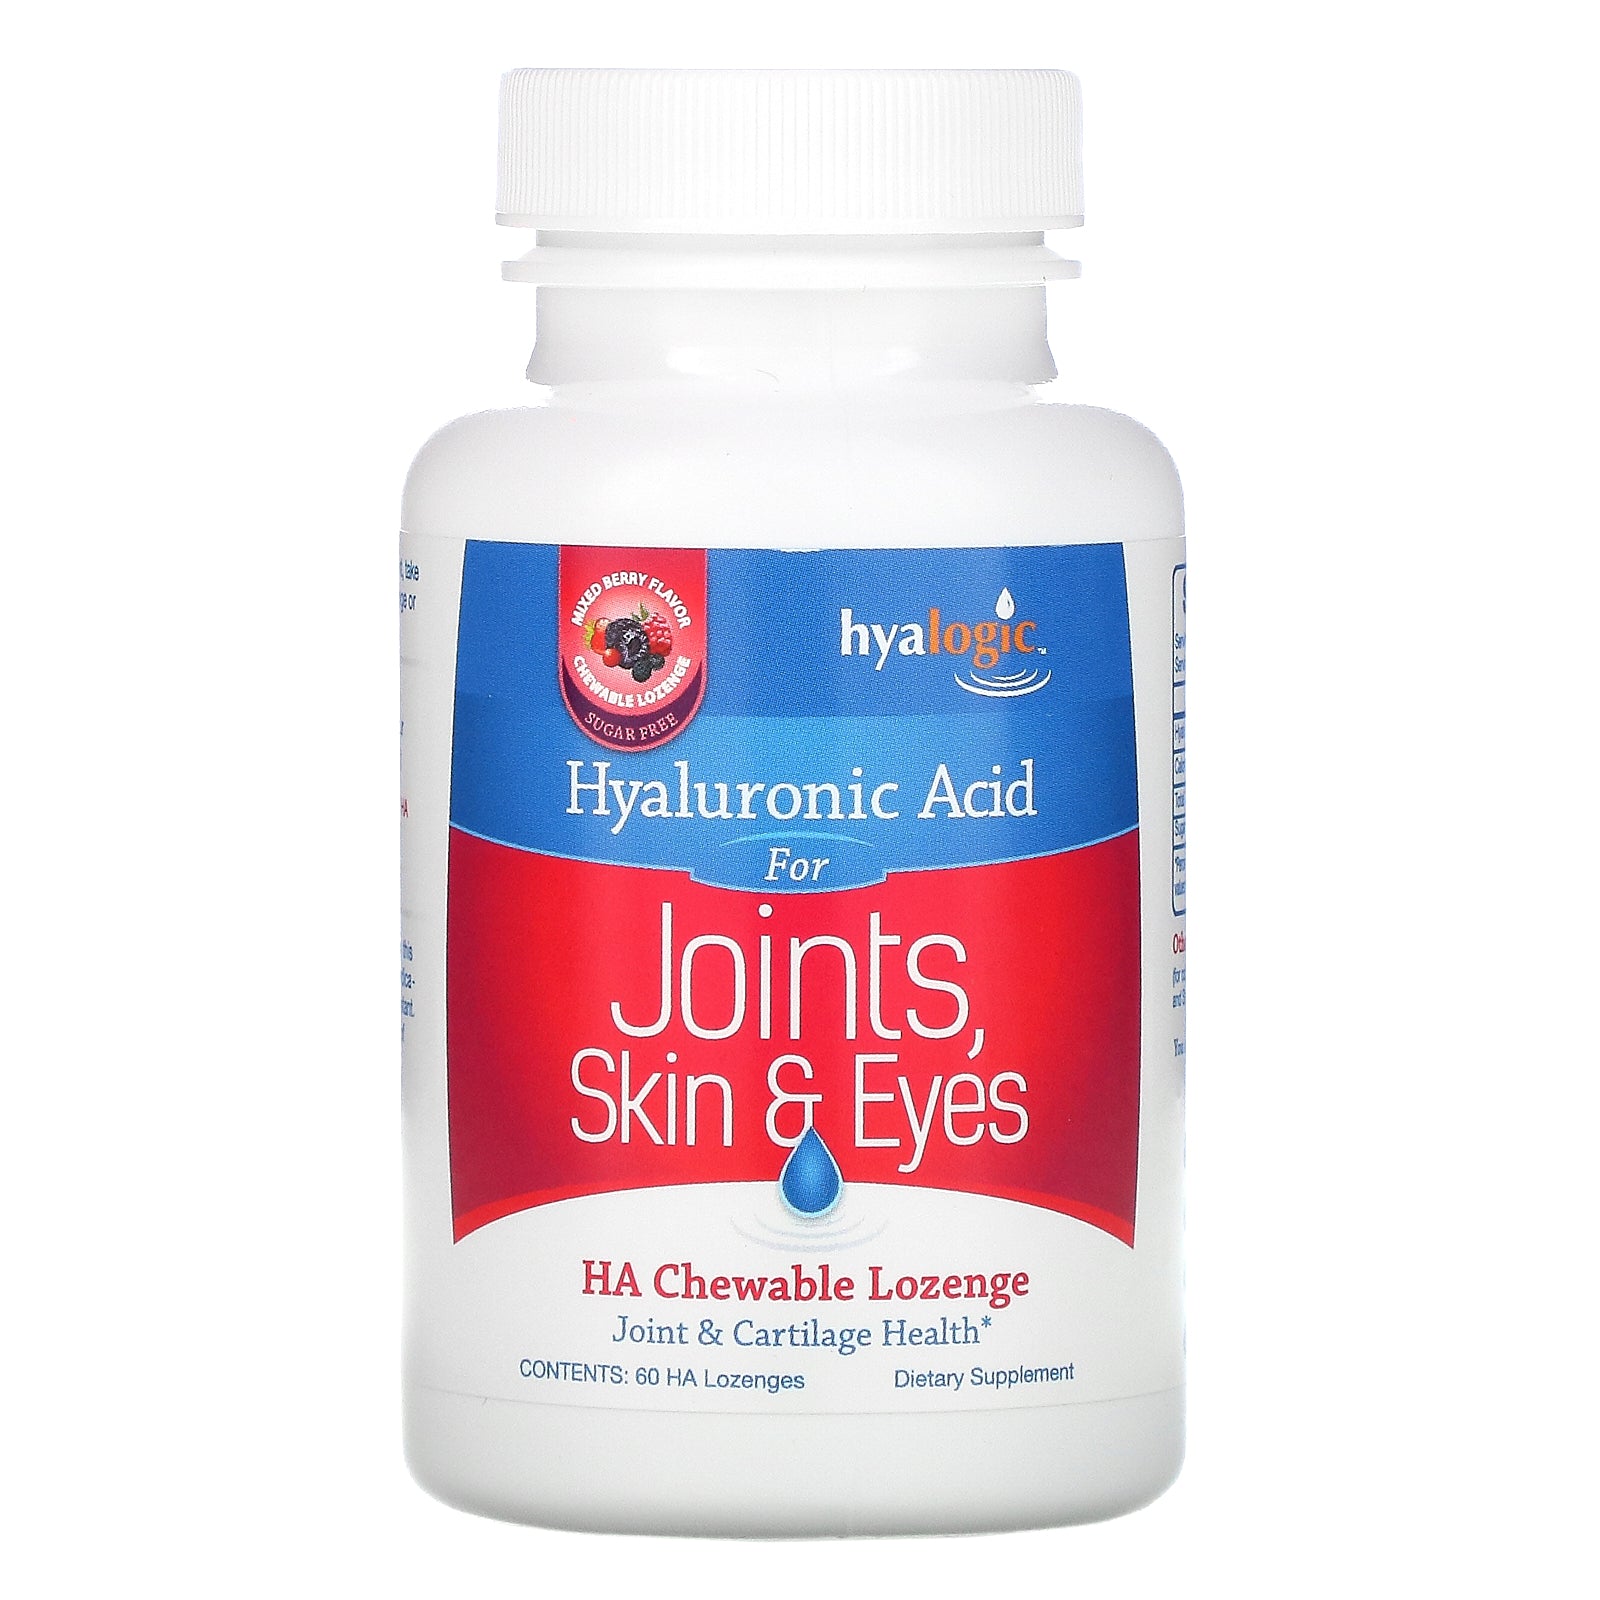 Hyalogic, Hyaluronic Acid For Joints, Skin & Eyes, Mixed Berry Flavor, 60 HA Chewable Lozenges